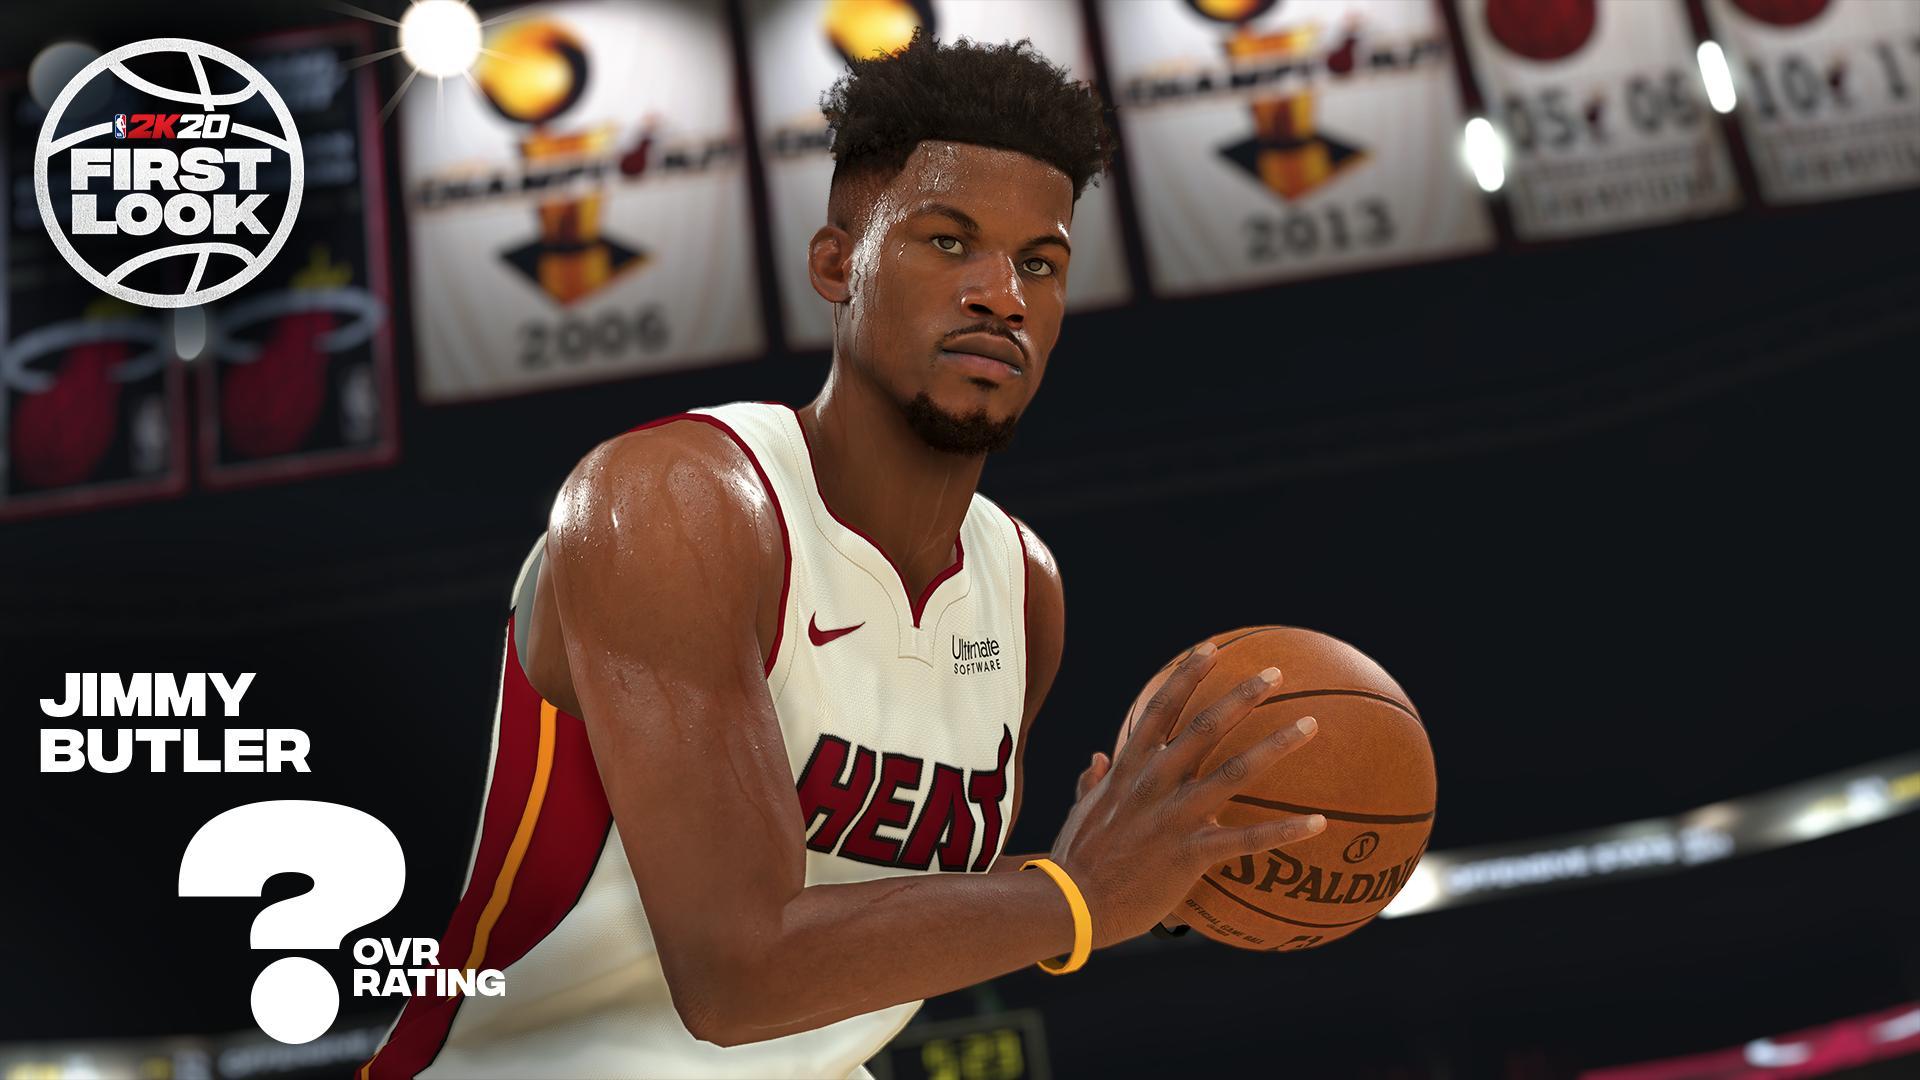 Jimmy Butler NBA 2K20 Rating (Current Miami Heat)